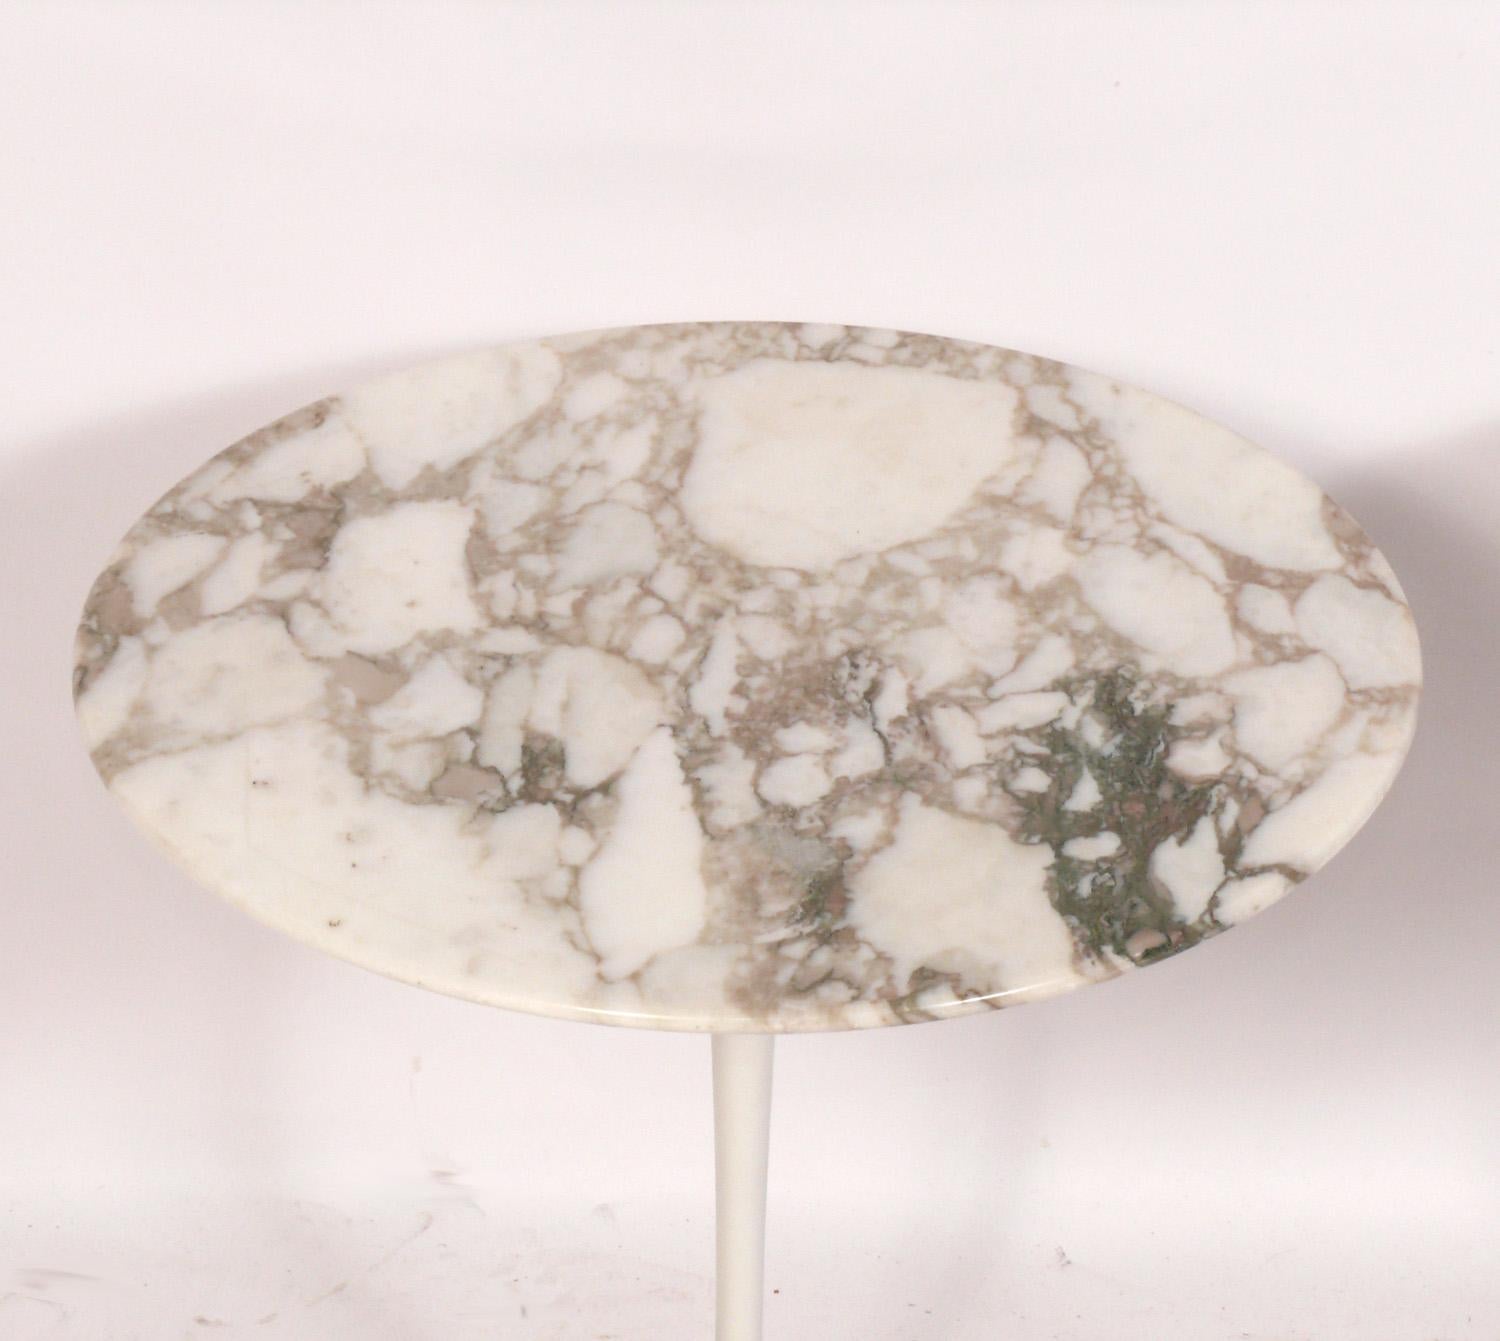 Pair of Marble Top Tulip Pedestal End or Side Tables, designed by Eero Saarinen for Knoll, American, circa 1970s. These are vintage authentic examples and are signed with a Knoll label underneath. They are a versatile size and can be used as side or